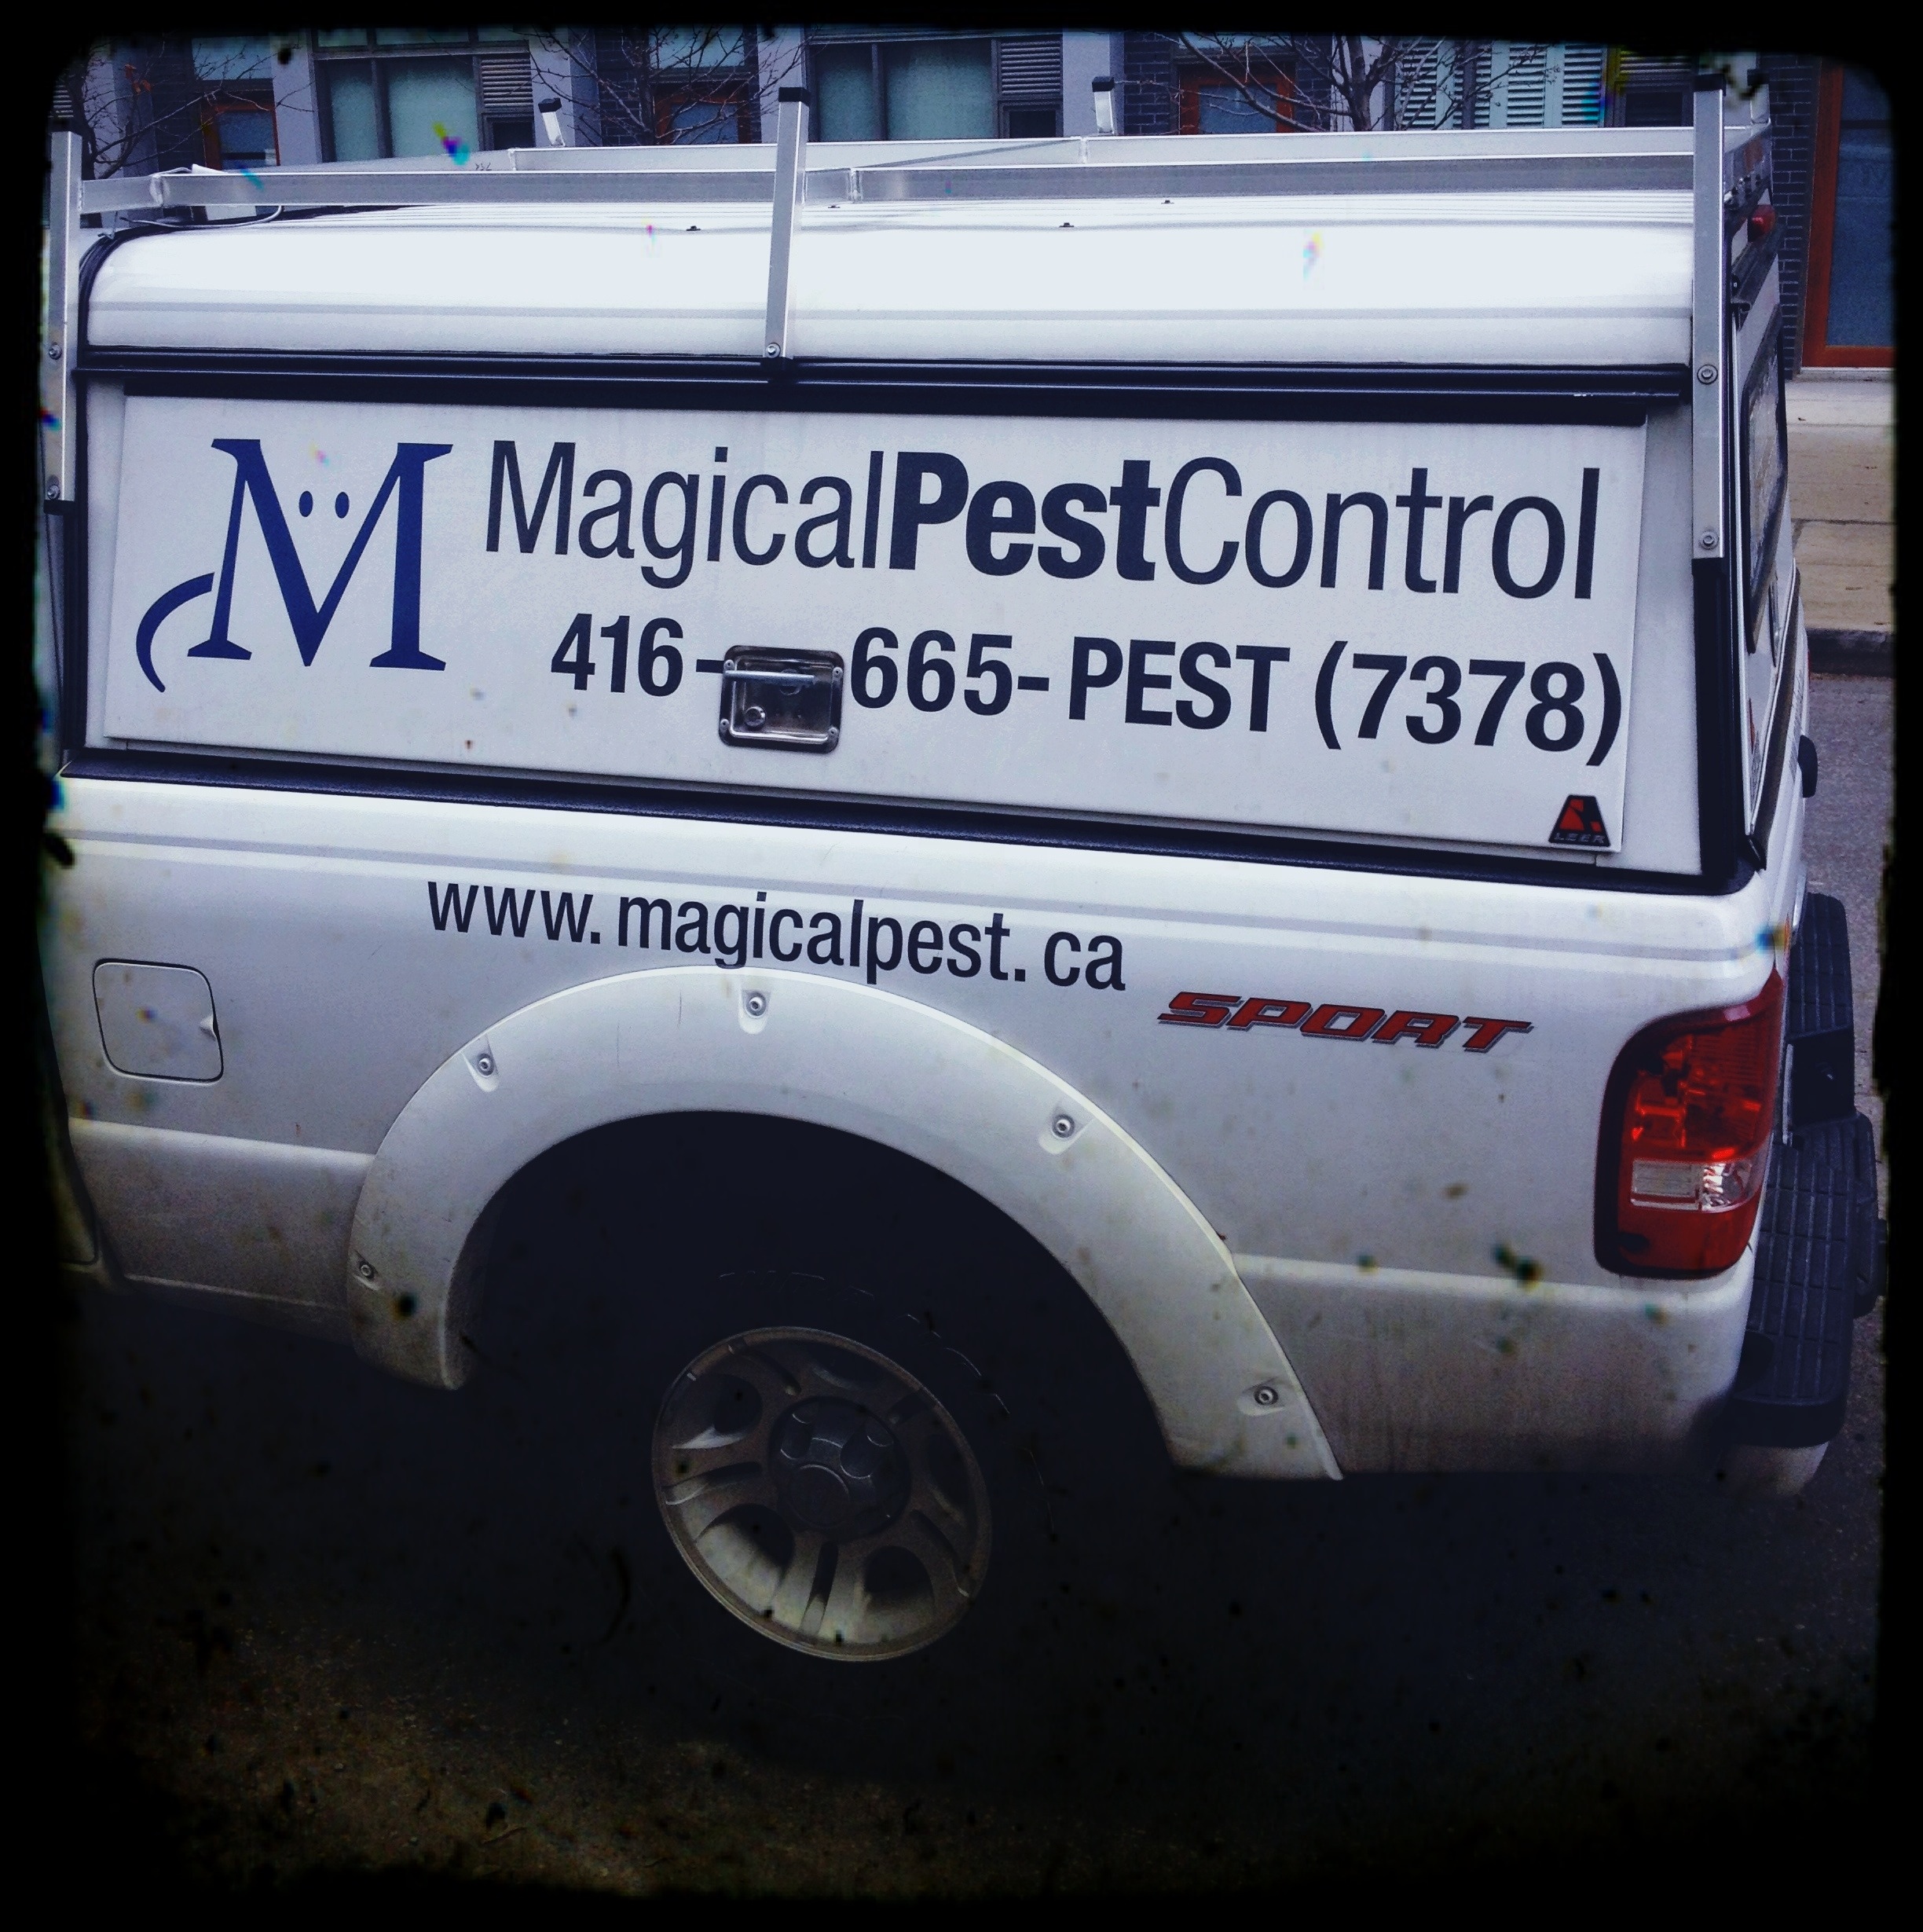 "Finally, Someone Who Can Help With My Unicorn Infestation" - Magical Pest Control, Toronto